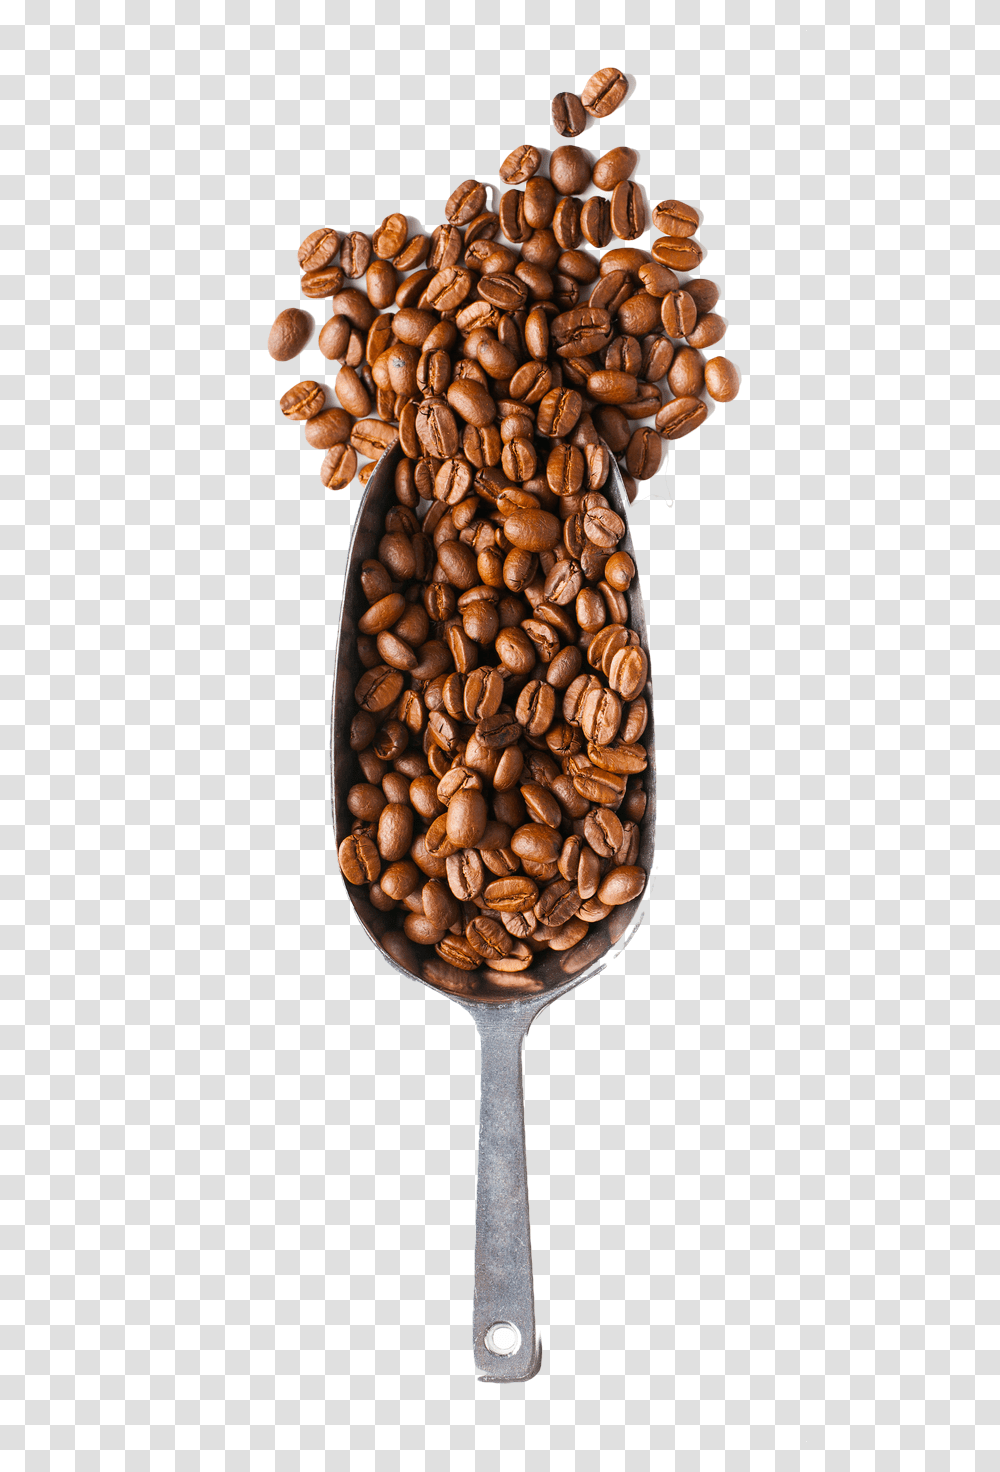 Coffee Beans And Spoon Download Coffee Beans Spoon, Plant, Vegetable, Food, Grain Transparent Png